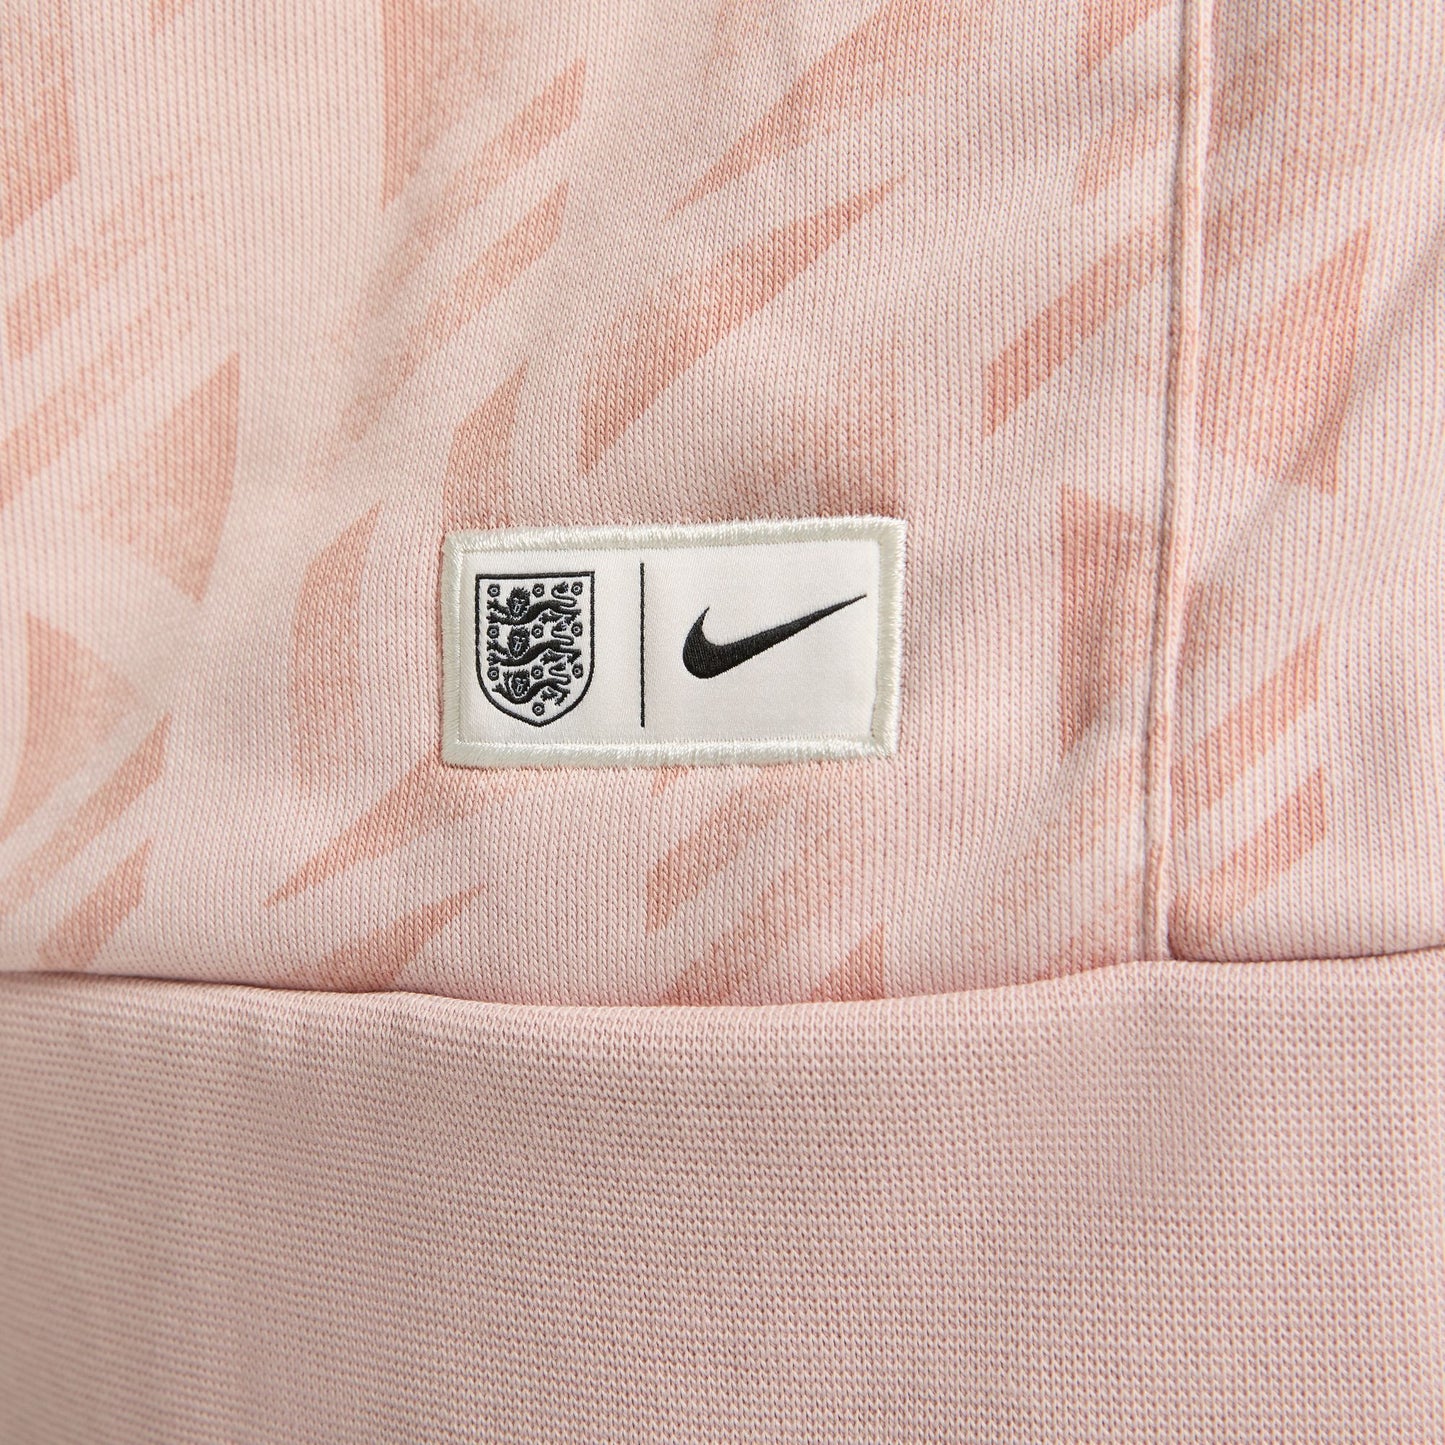 England Standard Issue Women's Nike Dri-FIT Pullover Hoodie